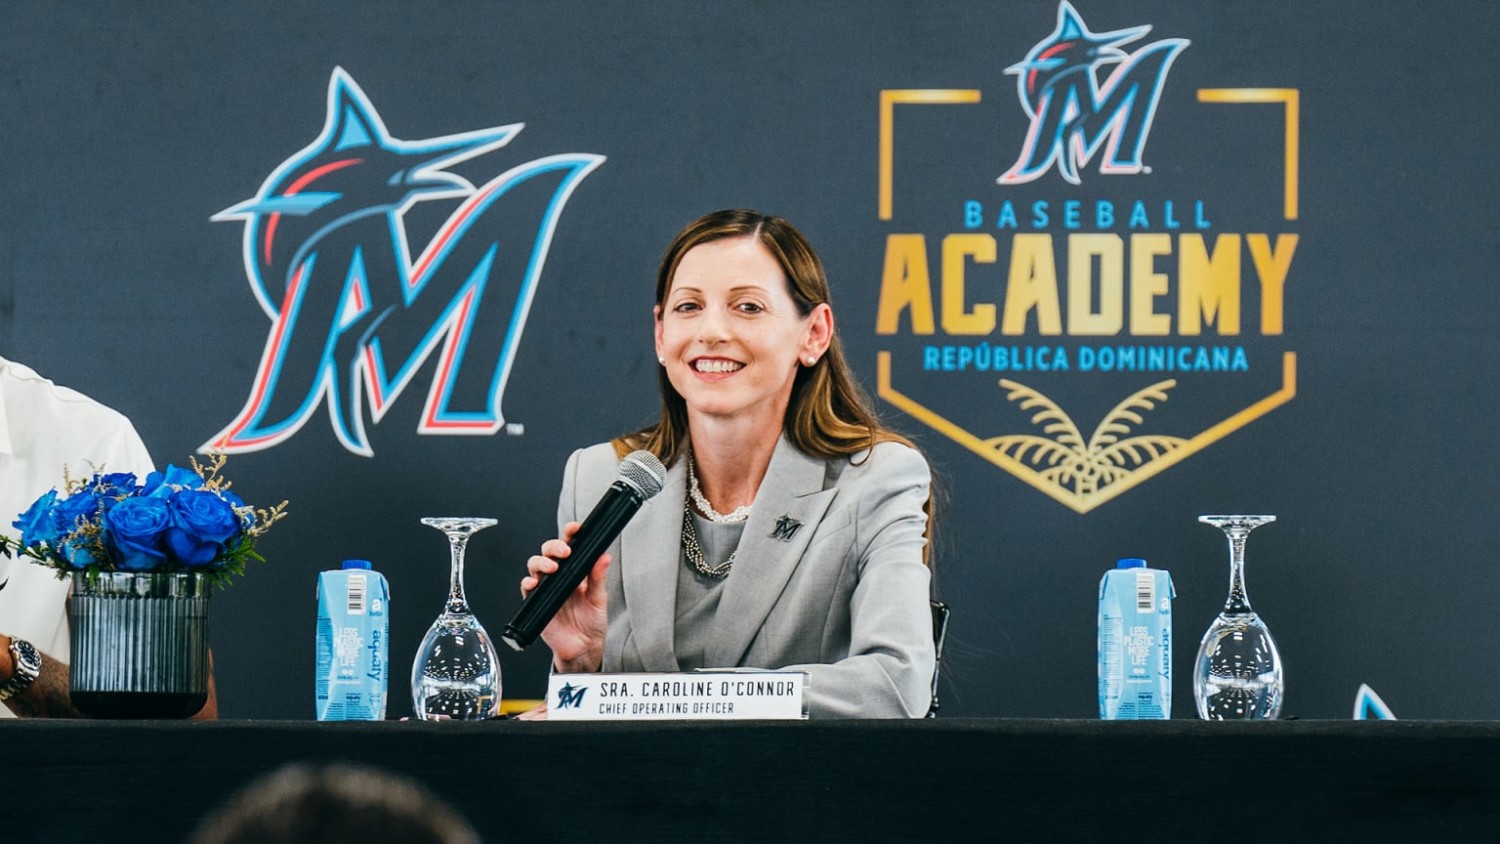 Caroline O'Connor of Freehold NJ, is Miami Marlins' president of